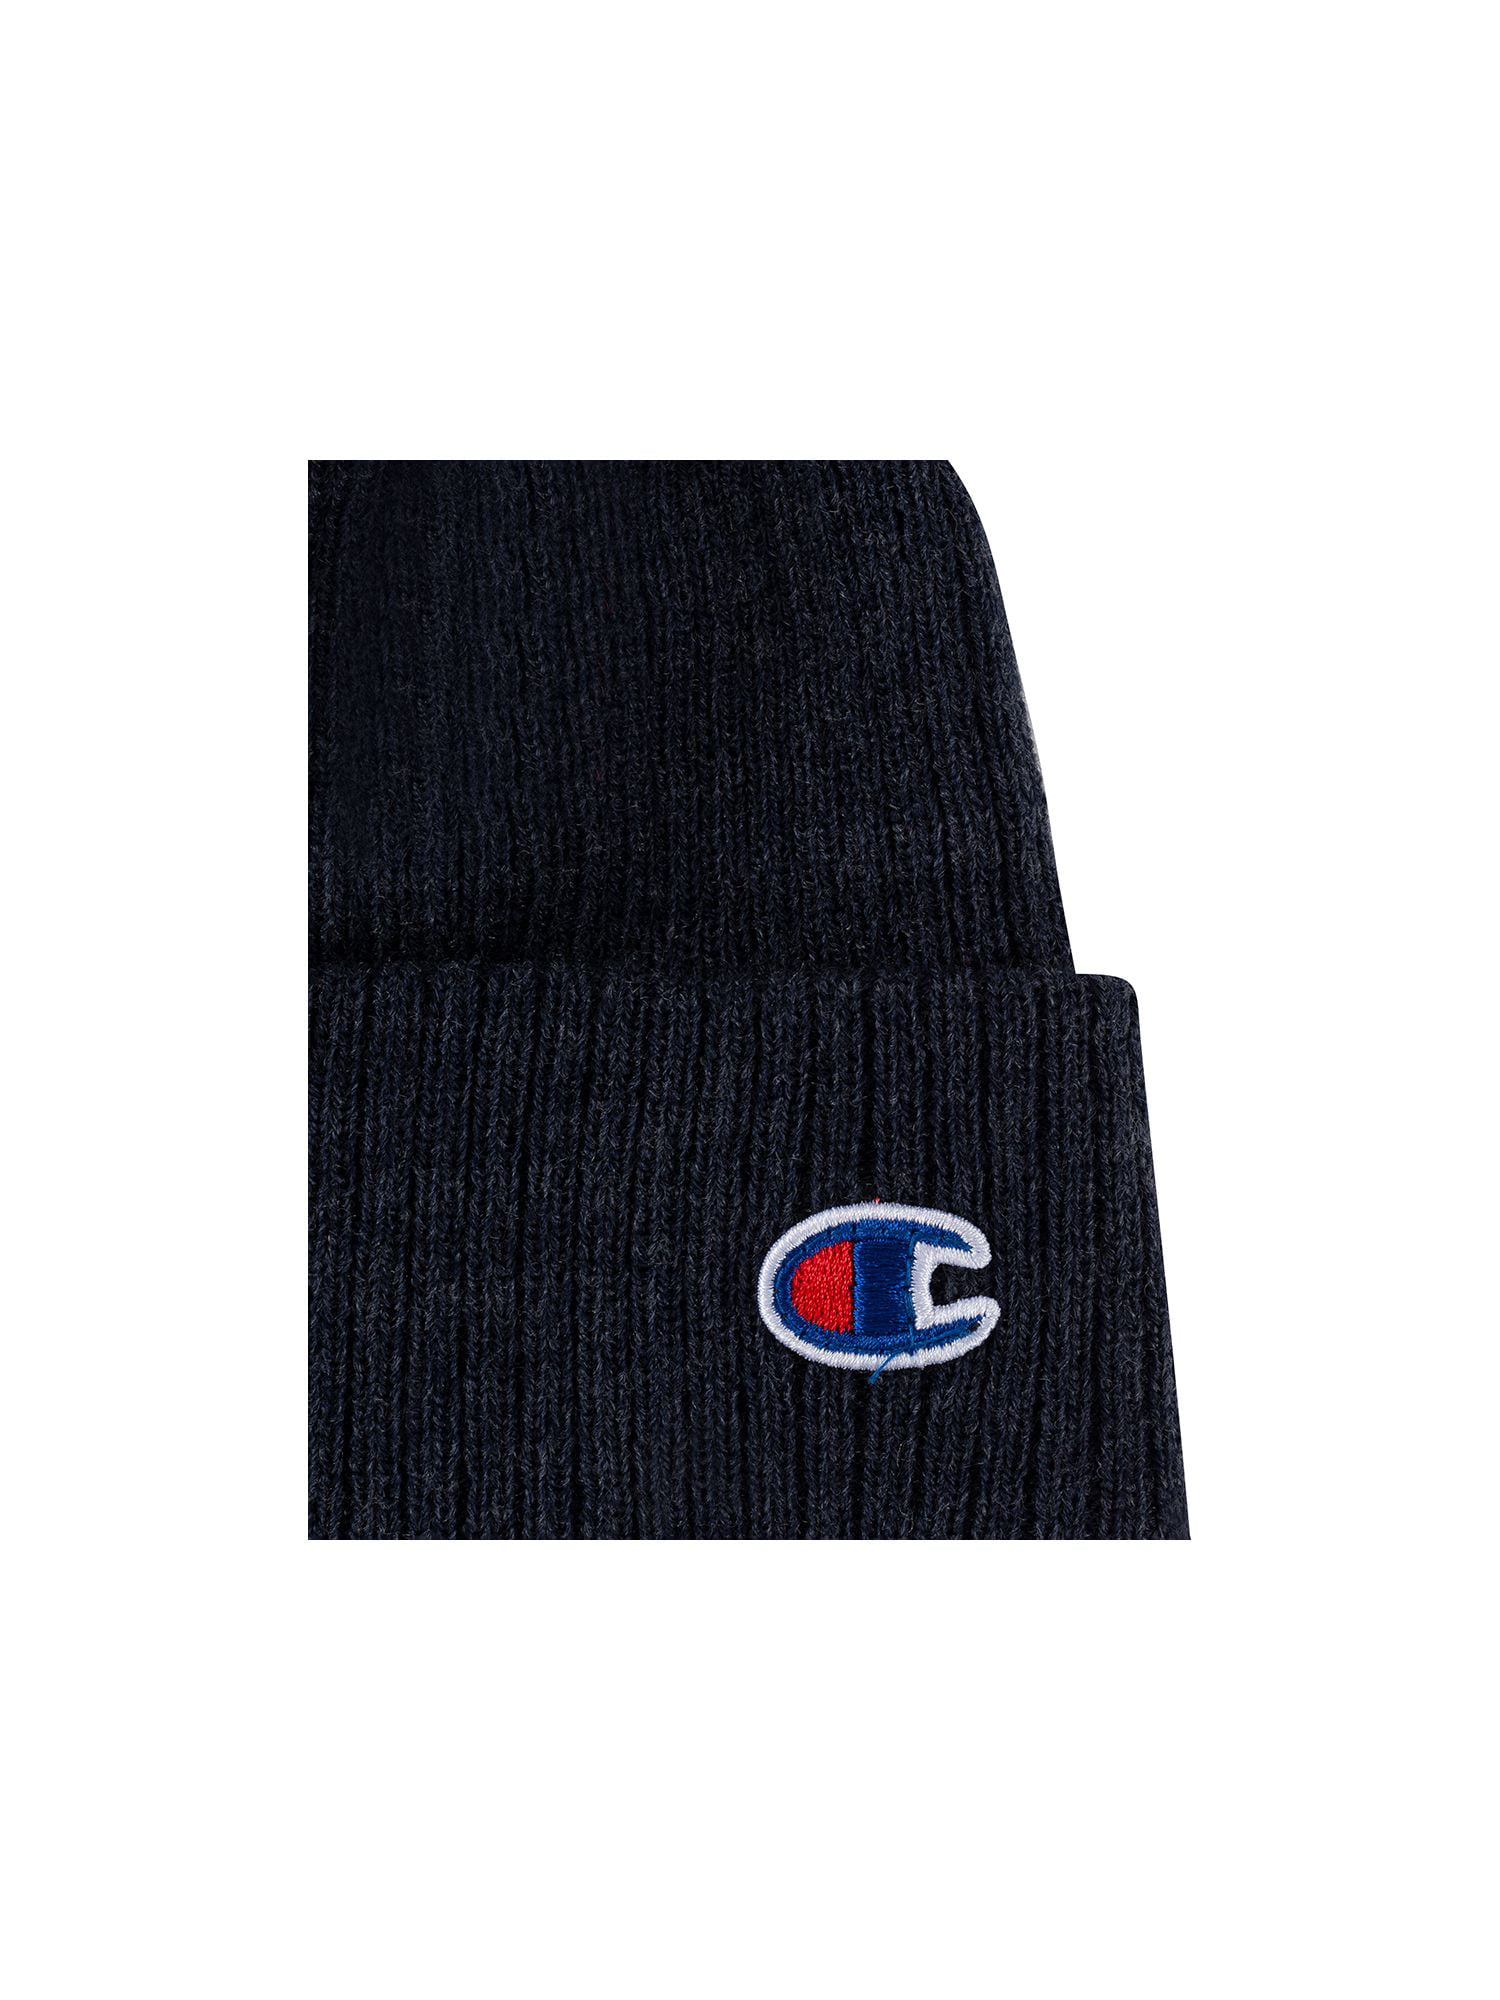 CHAMPION Black Embroidered Ribbed Acrylic Cap Logo Fitted Beanie Hat